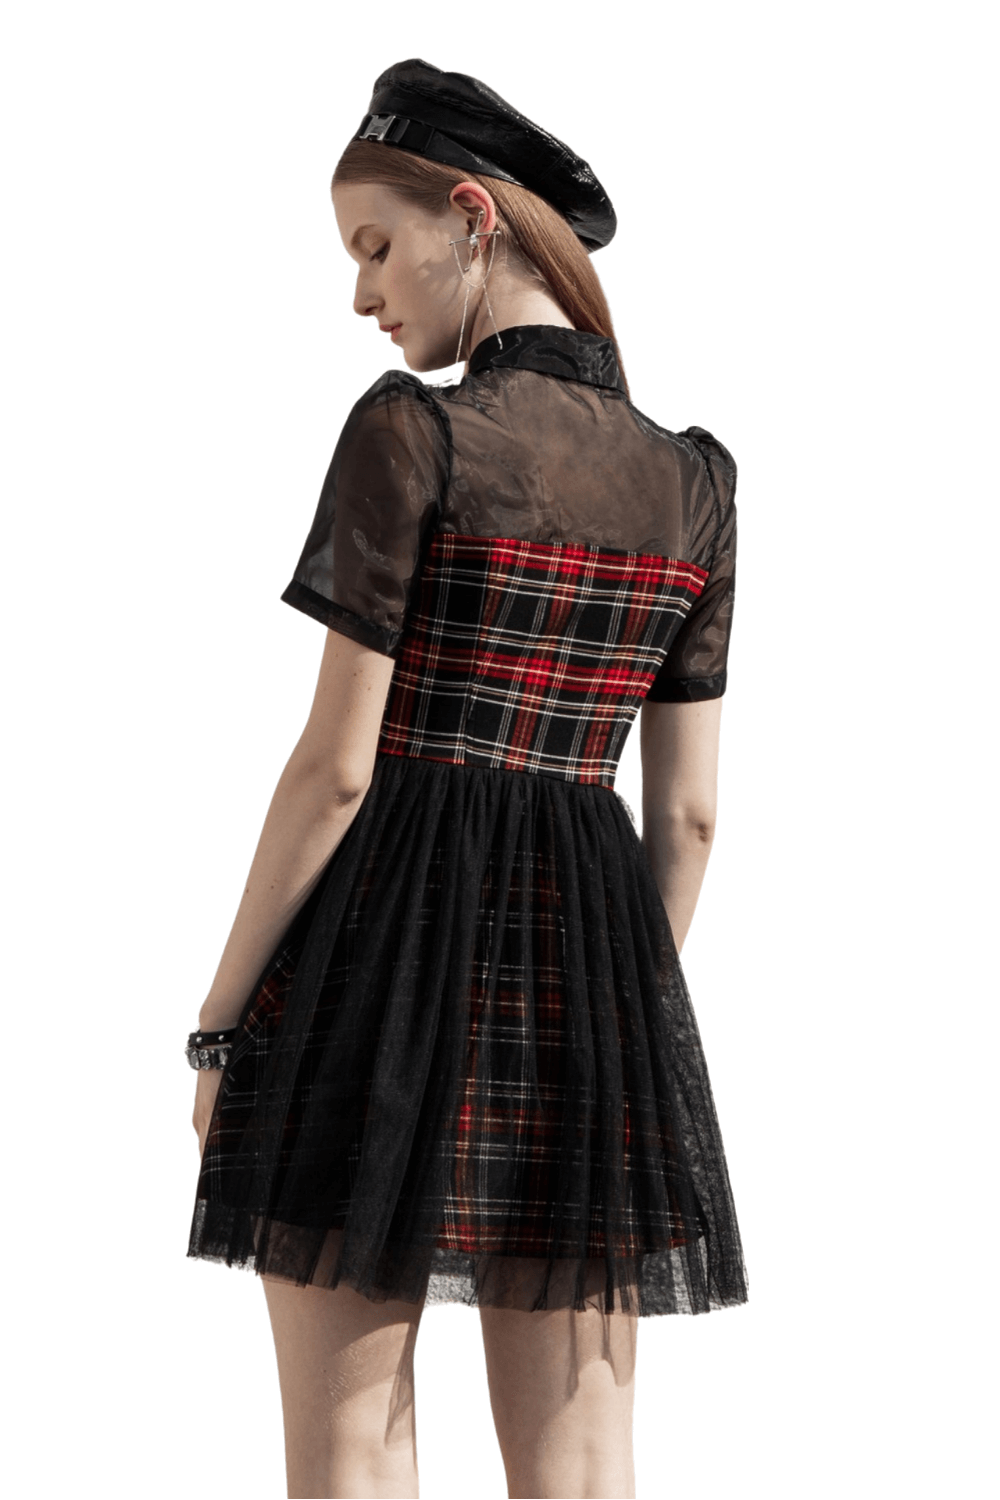 Gothic Punk Rave Plaid Dress with Heart Clasp Detailing